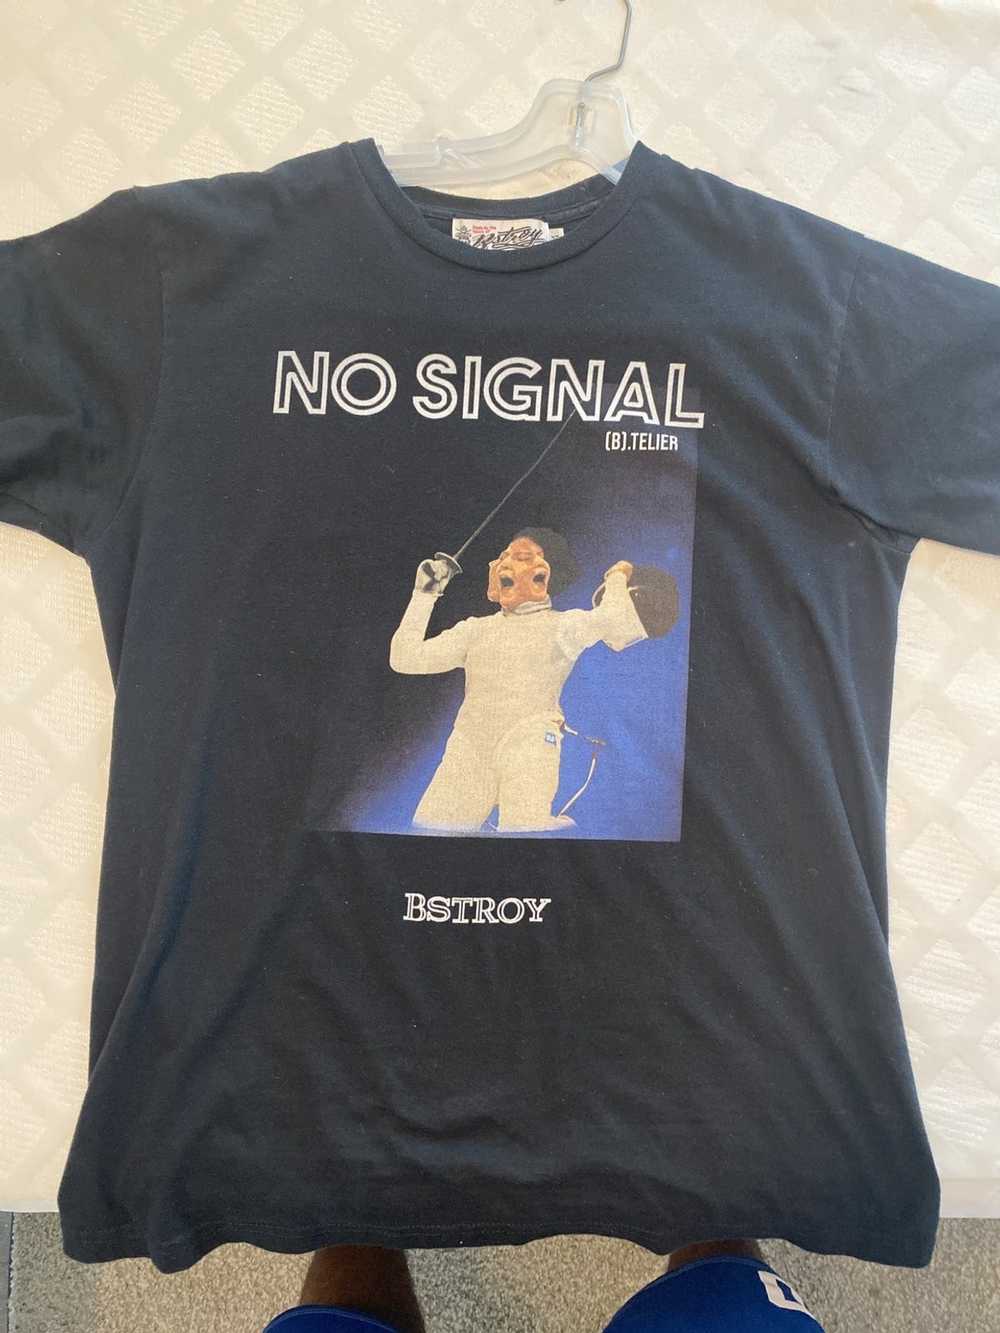 (B).Stroy BStroy “NO SIGNAL” tee - image 1